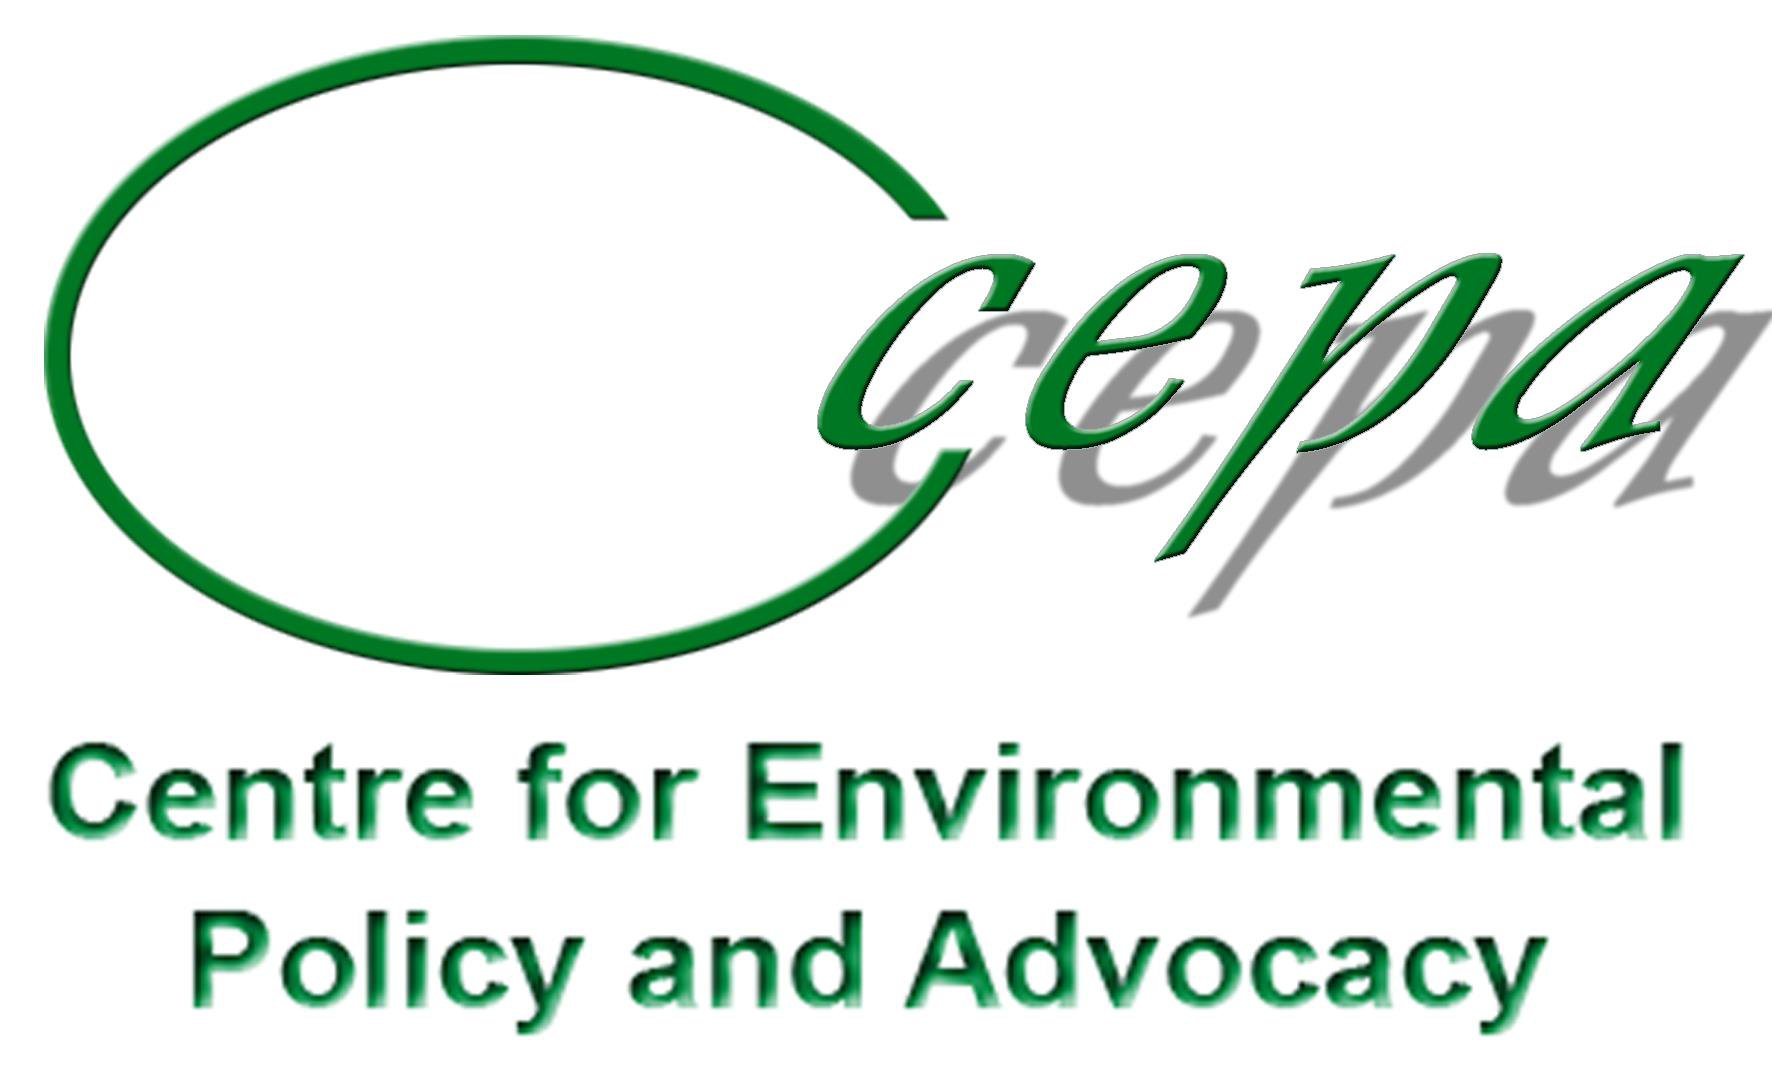 Centre for Environmental Policy and Advocacy (CEPA) Logo